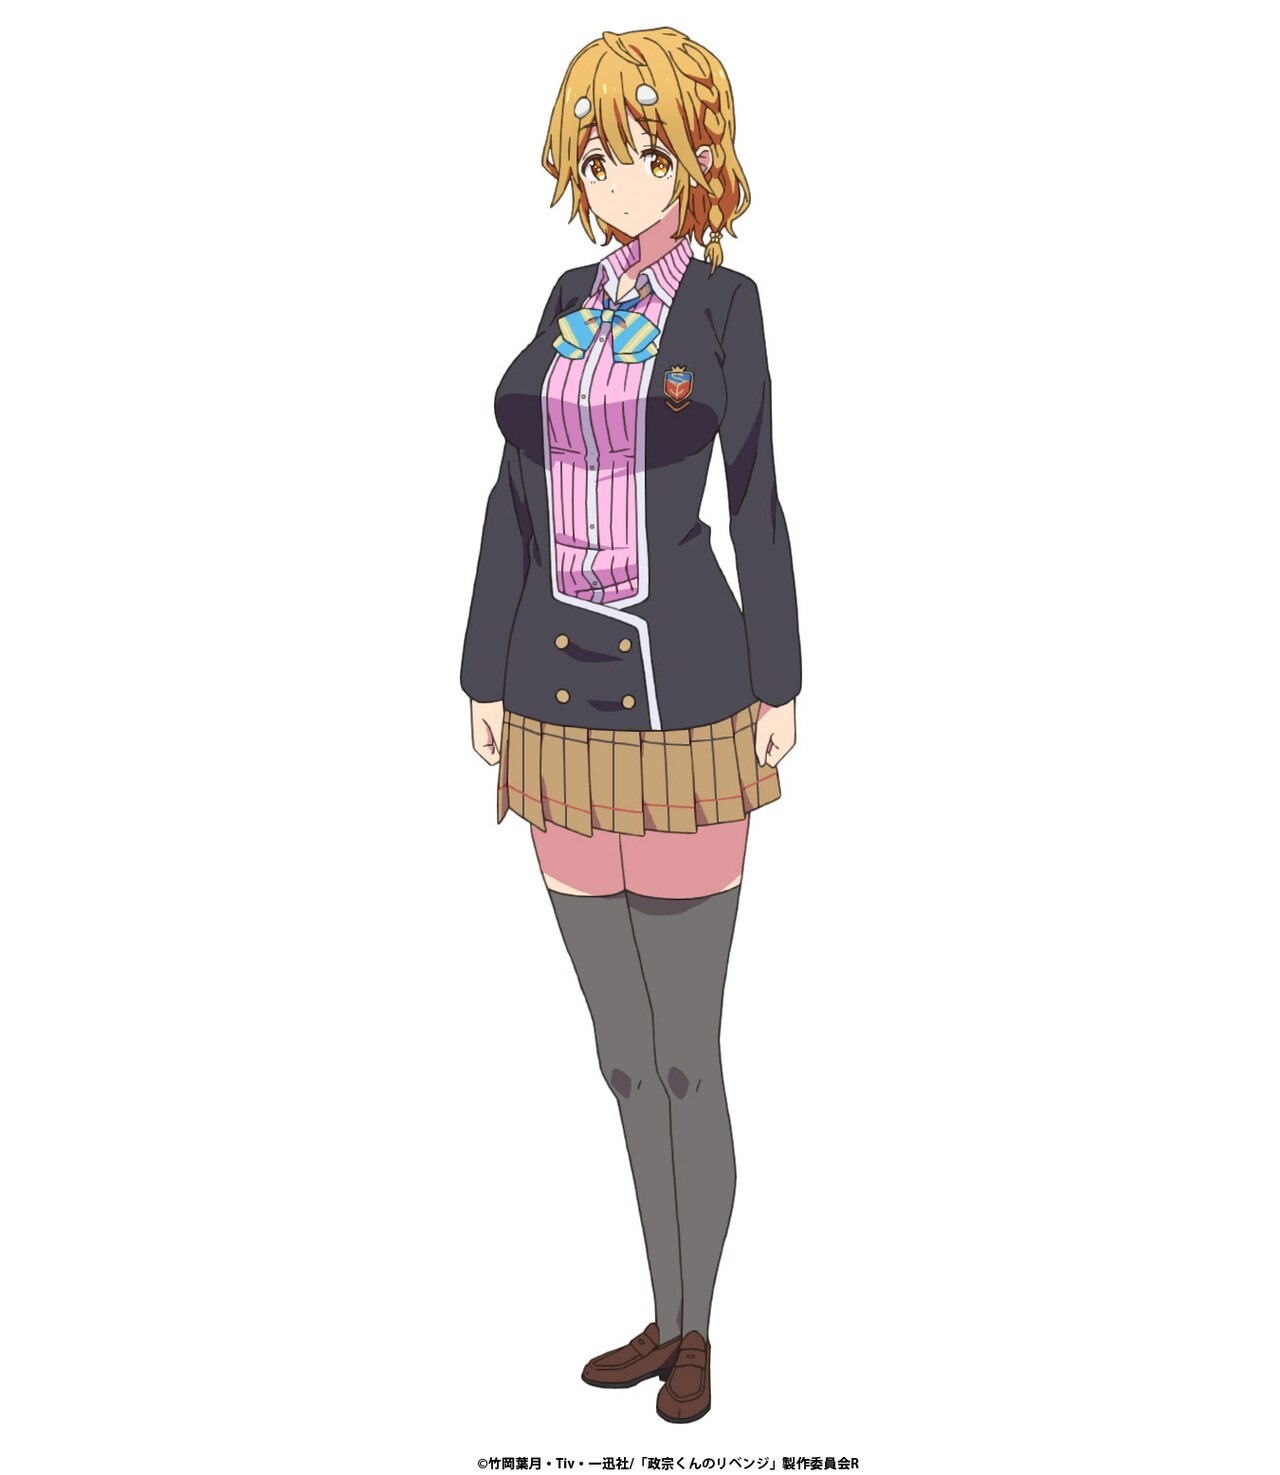 Crunchyroll - You'll Fall in Love With These New Masamune-kun's Revenge  Season 2 TV Anime Character Designs